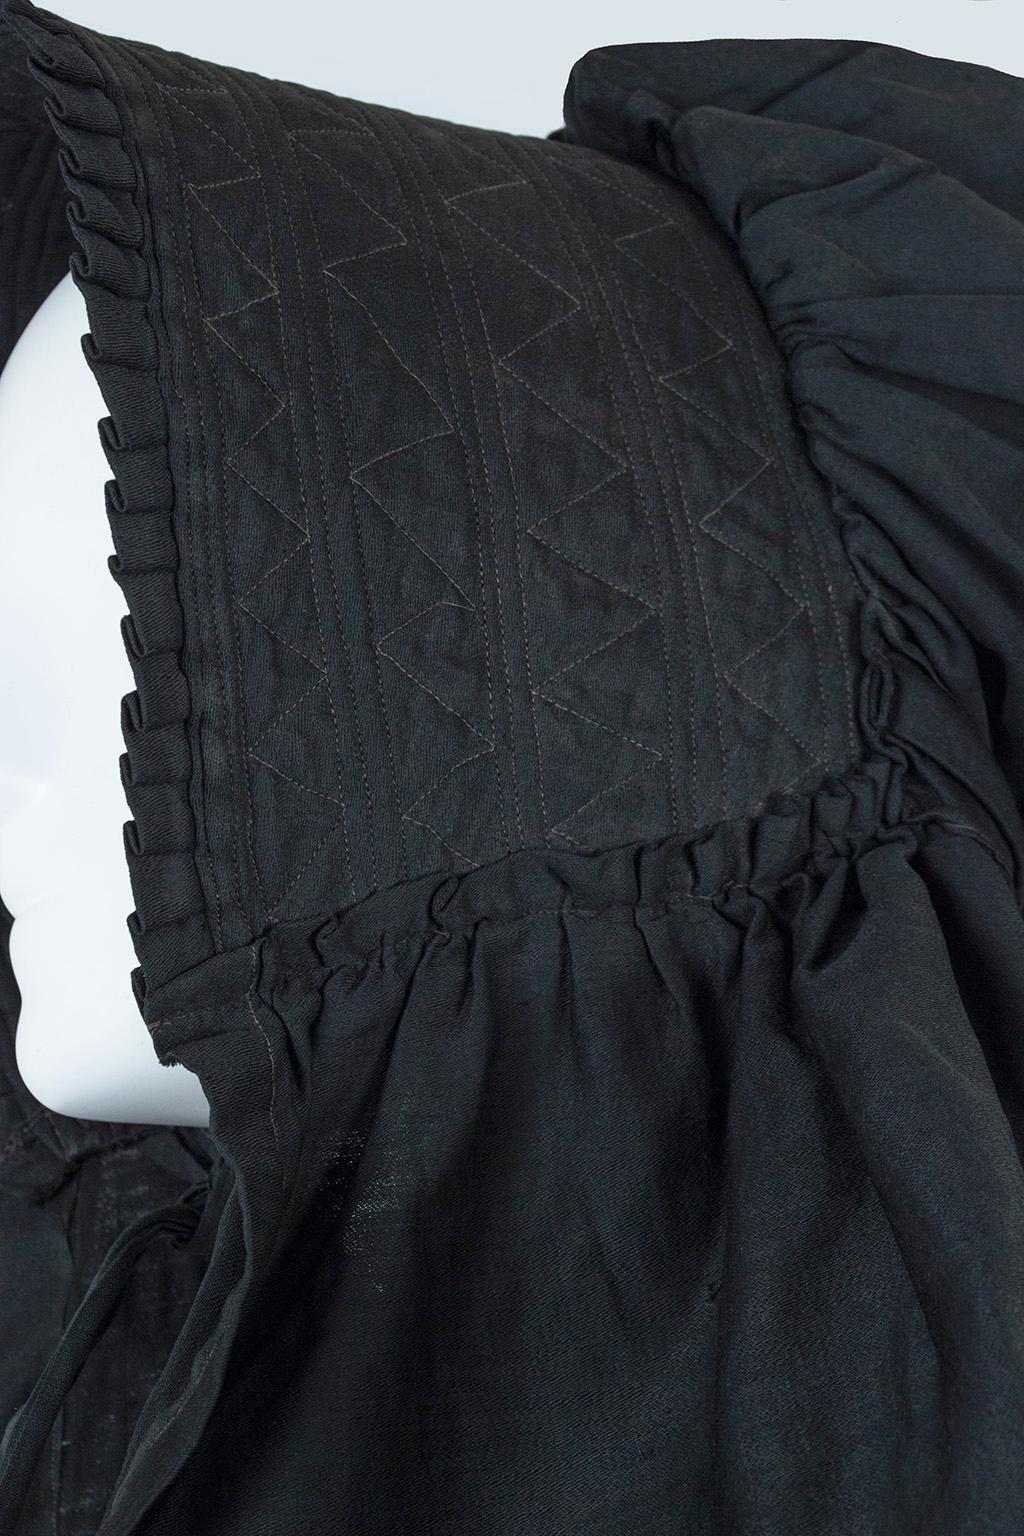 Black Victorian American Quilted Mourning Poke Bonnet with Sun Apron, 1850s